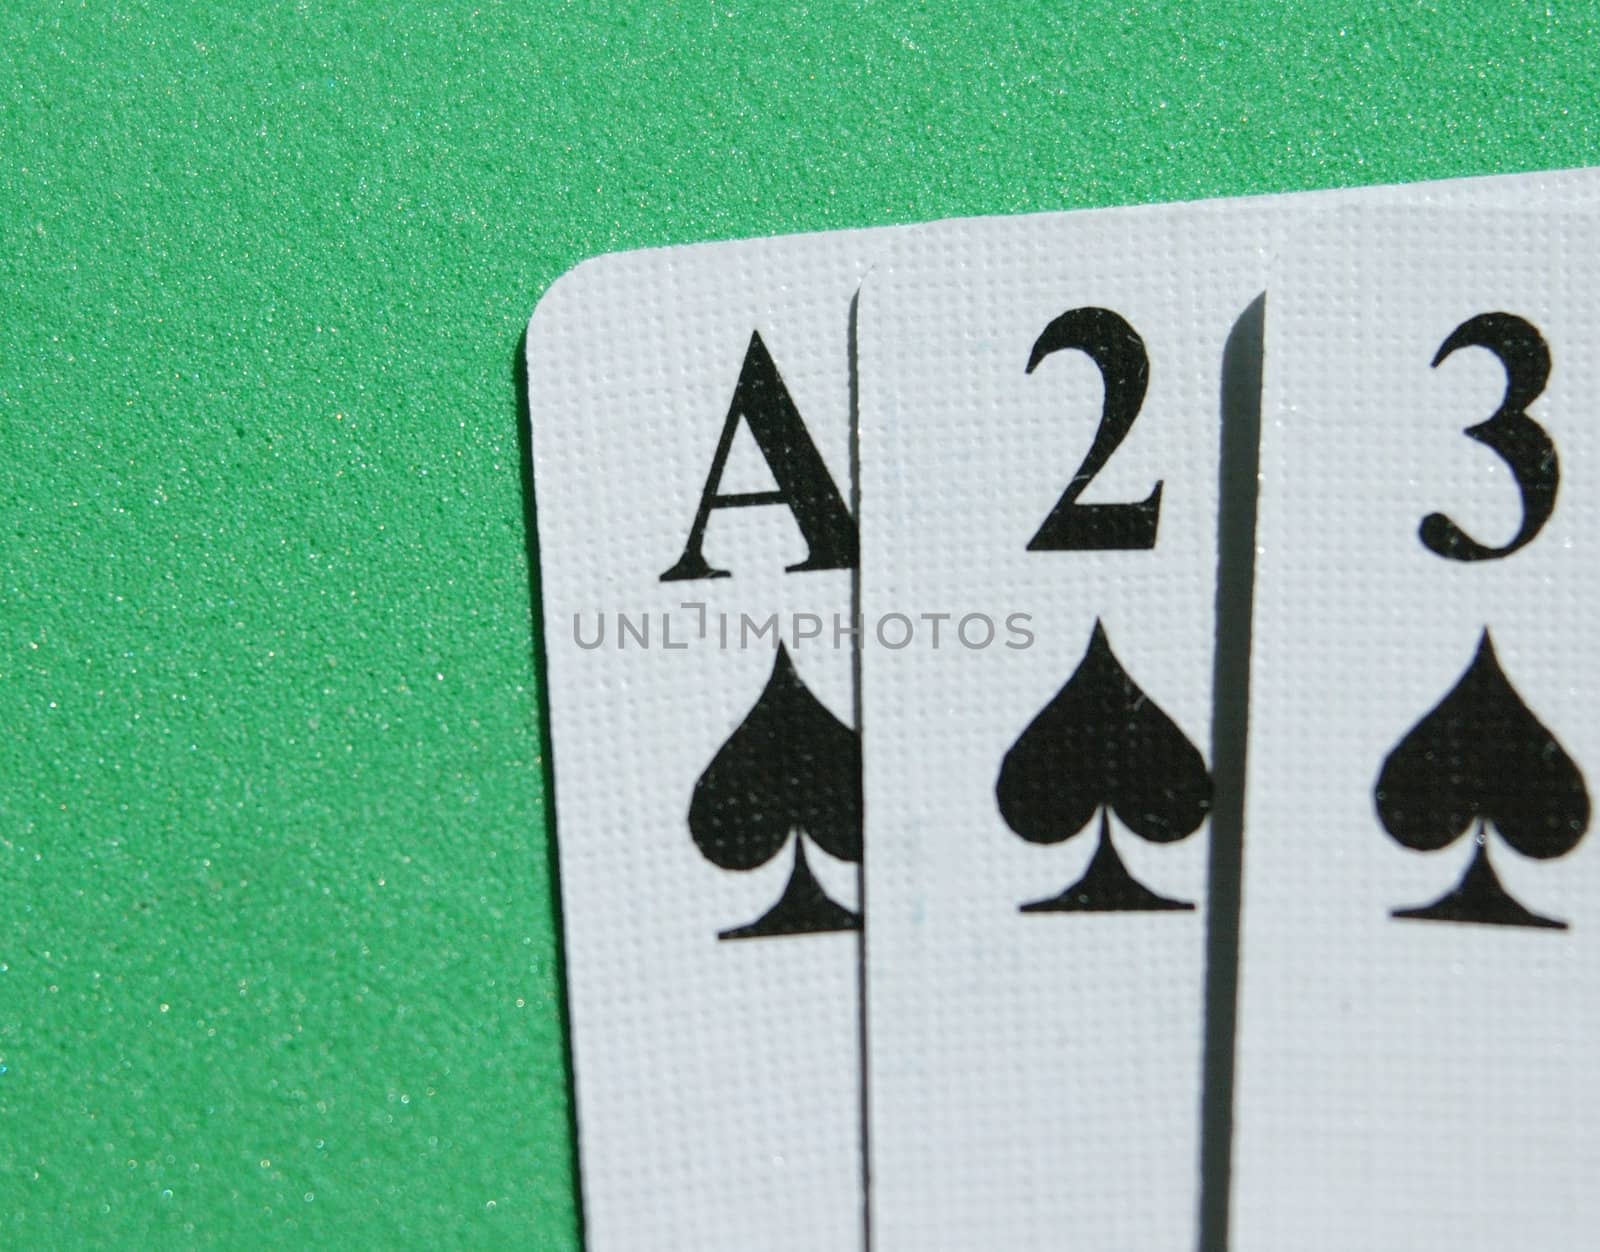 A closeup view of a very good poker hand